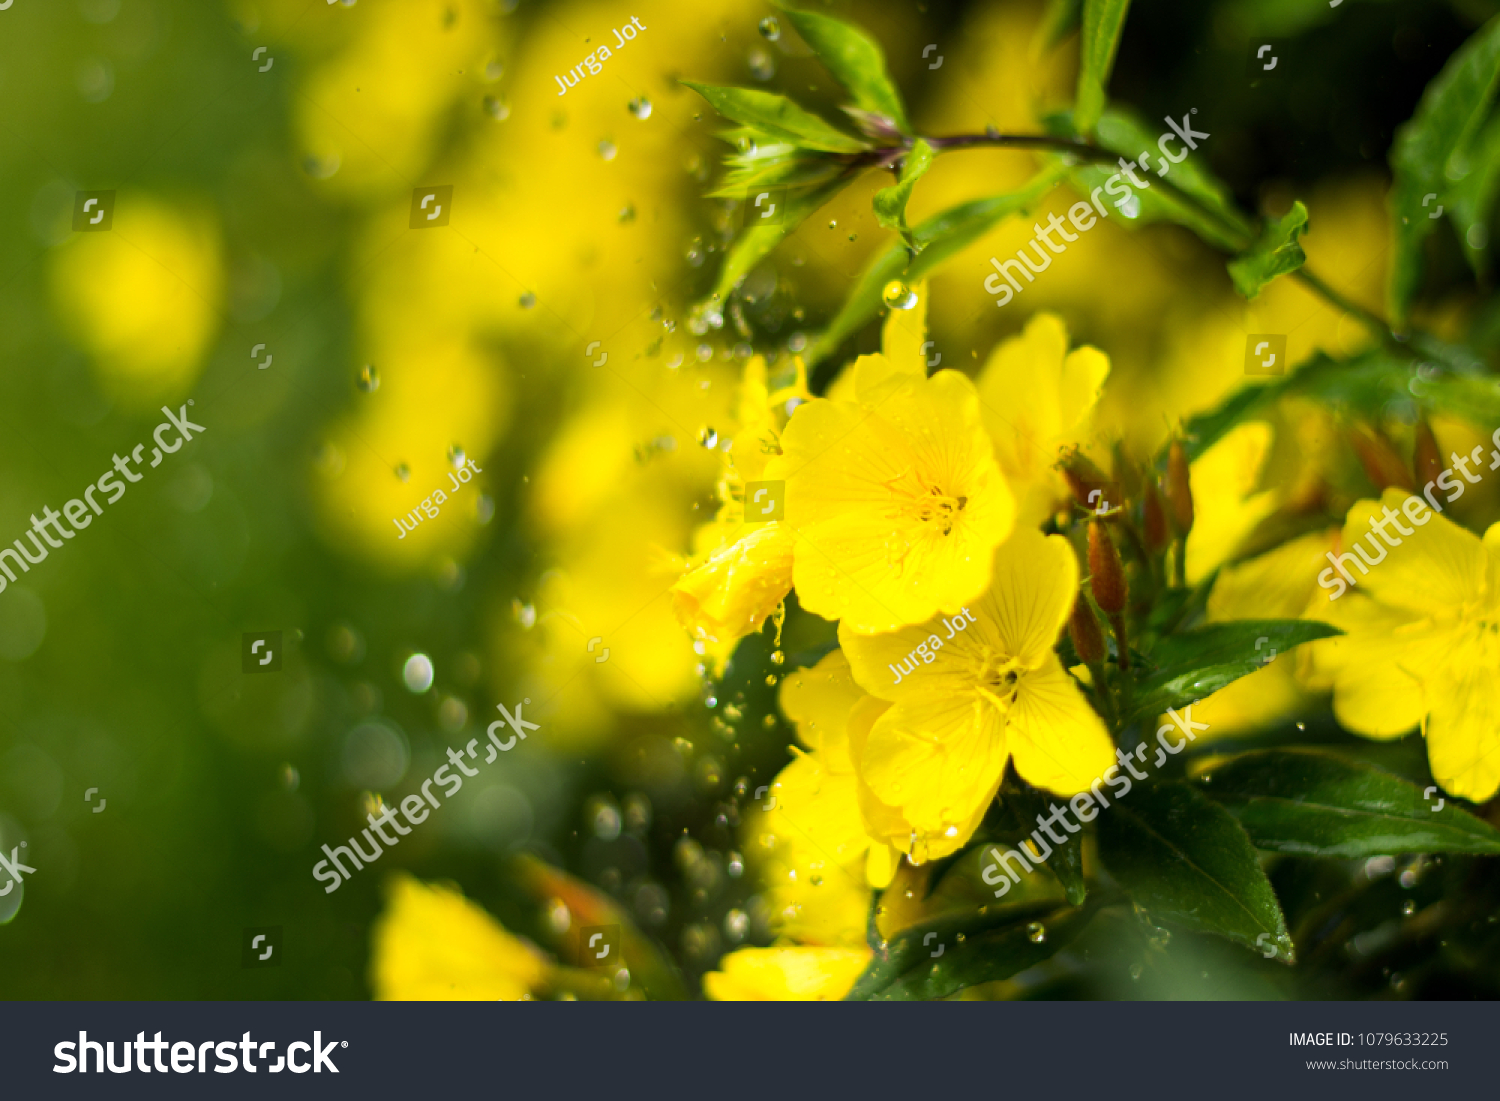 Dewy evening primroses in the flowerbed in the ornamental garden in a rainy day, nature and herb concept #1079633225